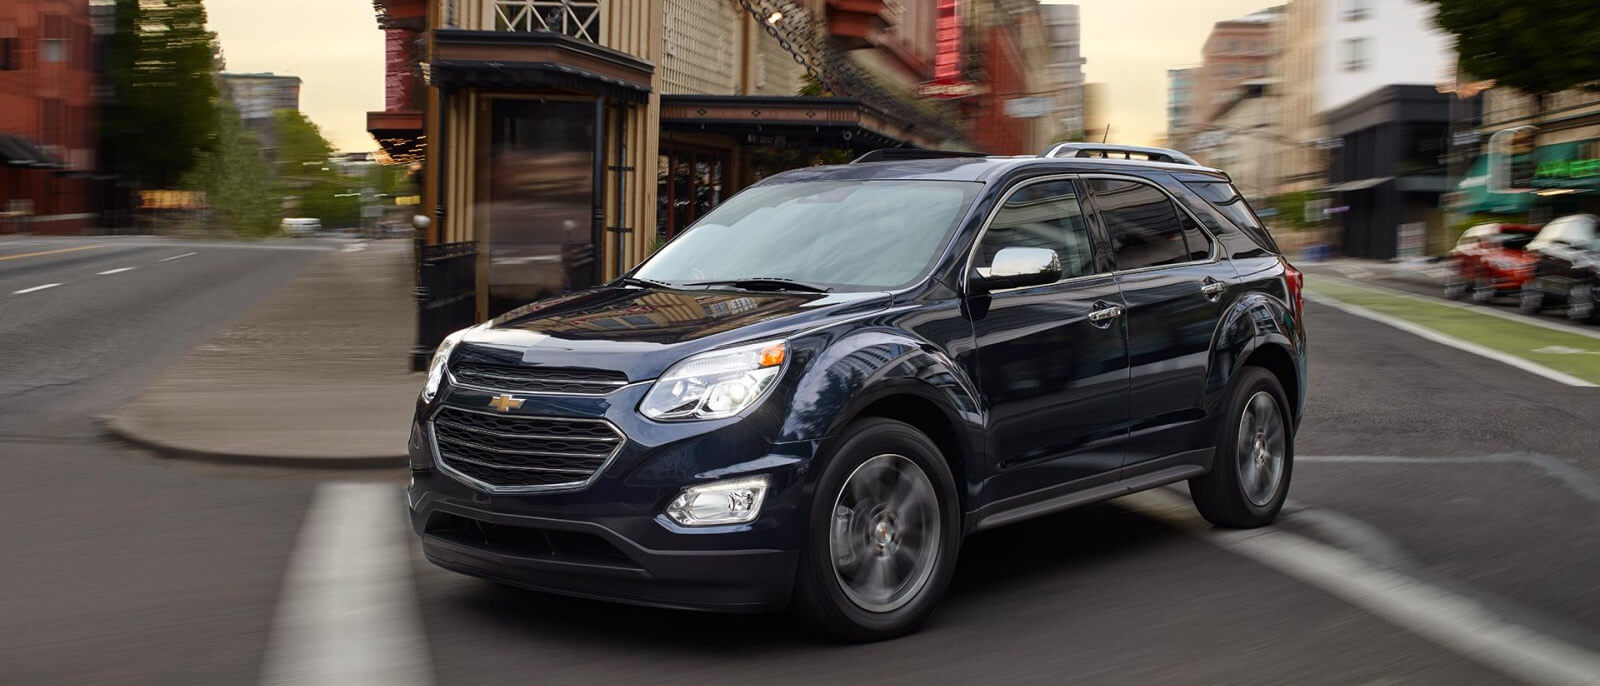 The 2017 Chevy Equinox Trims Delight Tampa and Sarasota